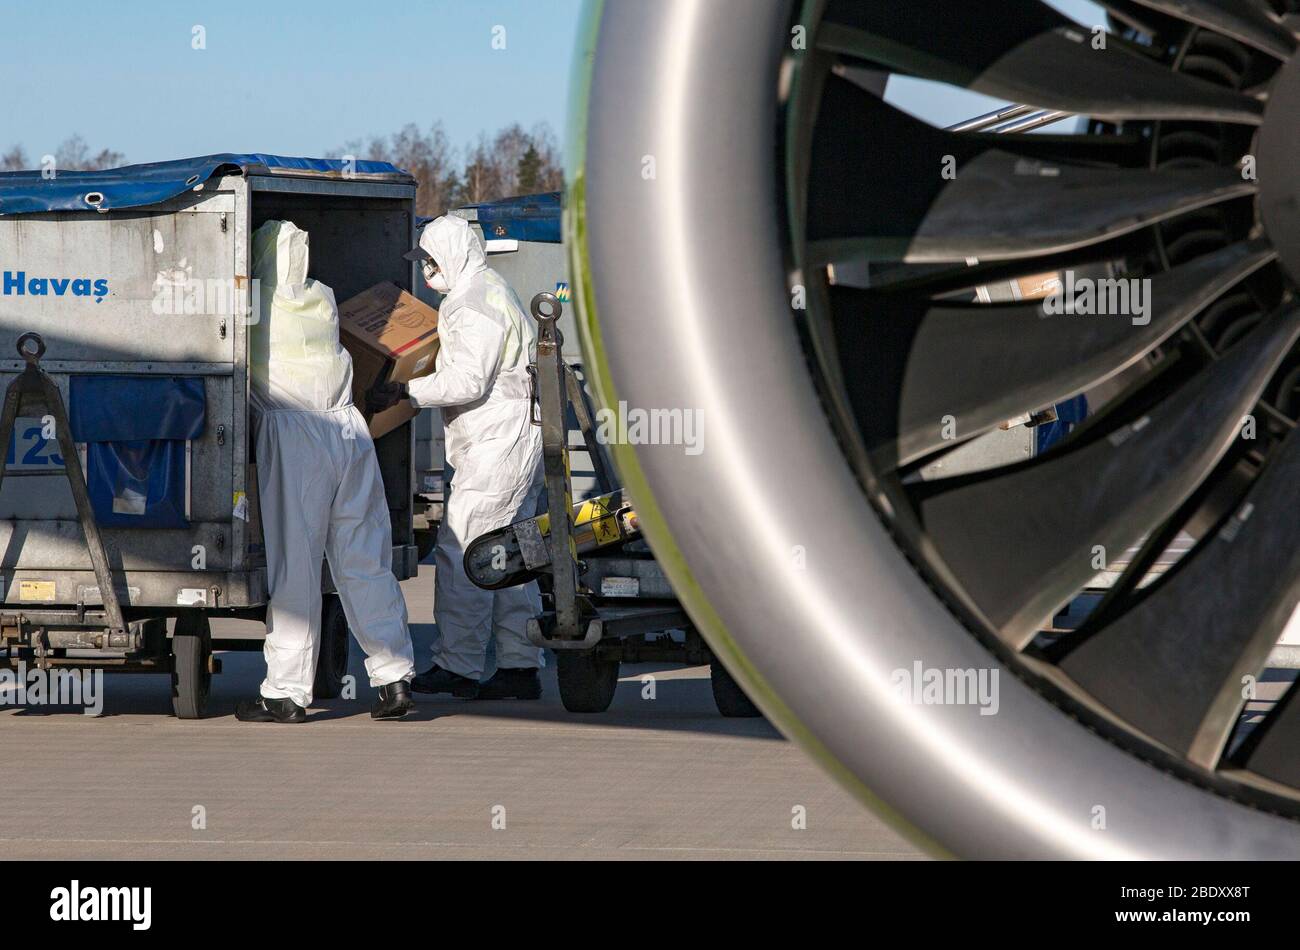 Riga, Riga. 10th Apr, 2020. Workers unload personal protection equipment (PPE) from China to help curb the spread of the novel coronavirus disease (COVID-19), in Riga, Latvia on April 10, 2020. Credit: Edijs Palens/Xinhua/Alamy Live News Stock Photo